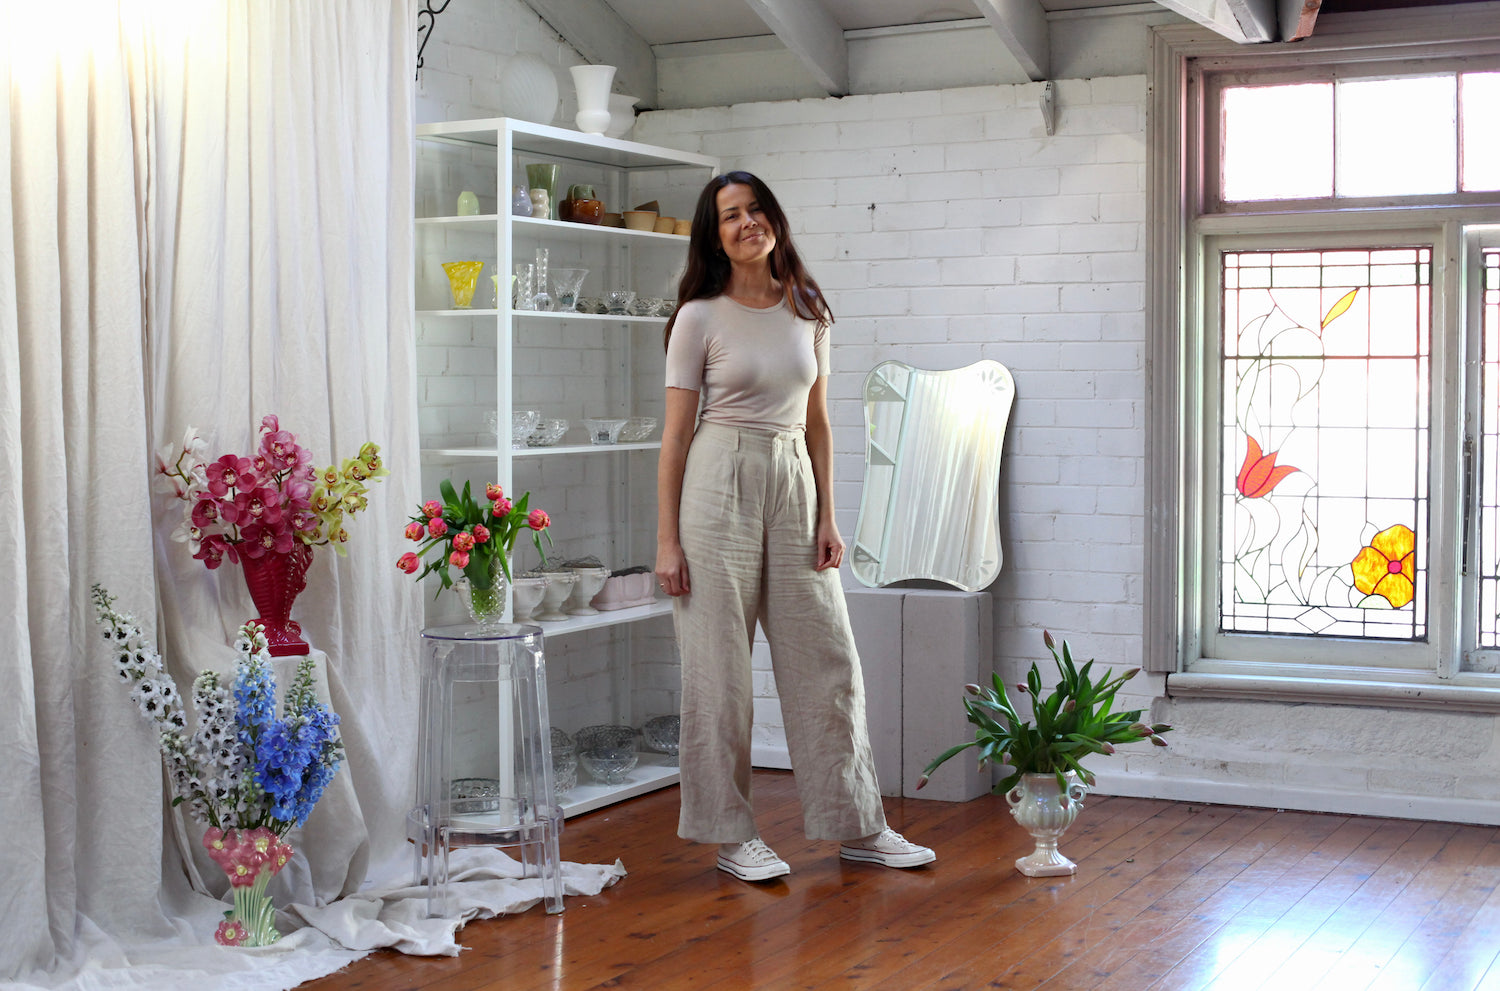 Florada is a Sydney-based floral boutique headed up by Dhani D’Arcy, a creative and passionate florist who is determined to make a positive change within the flower industry. 